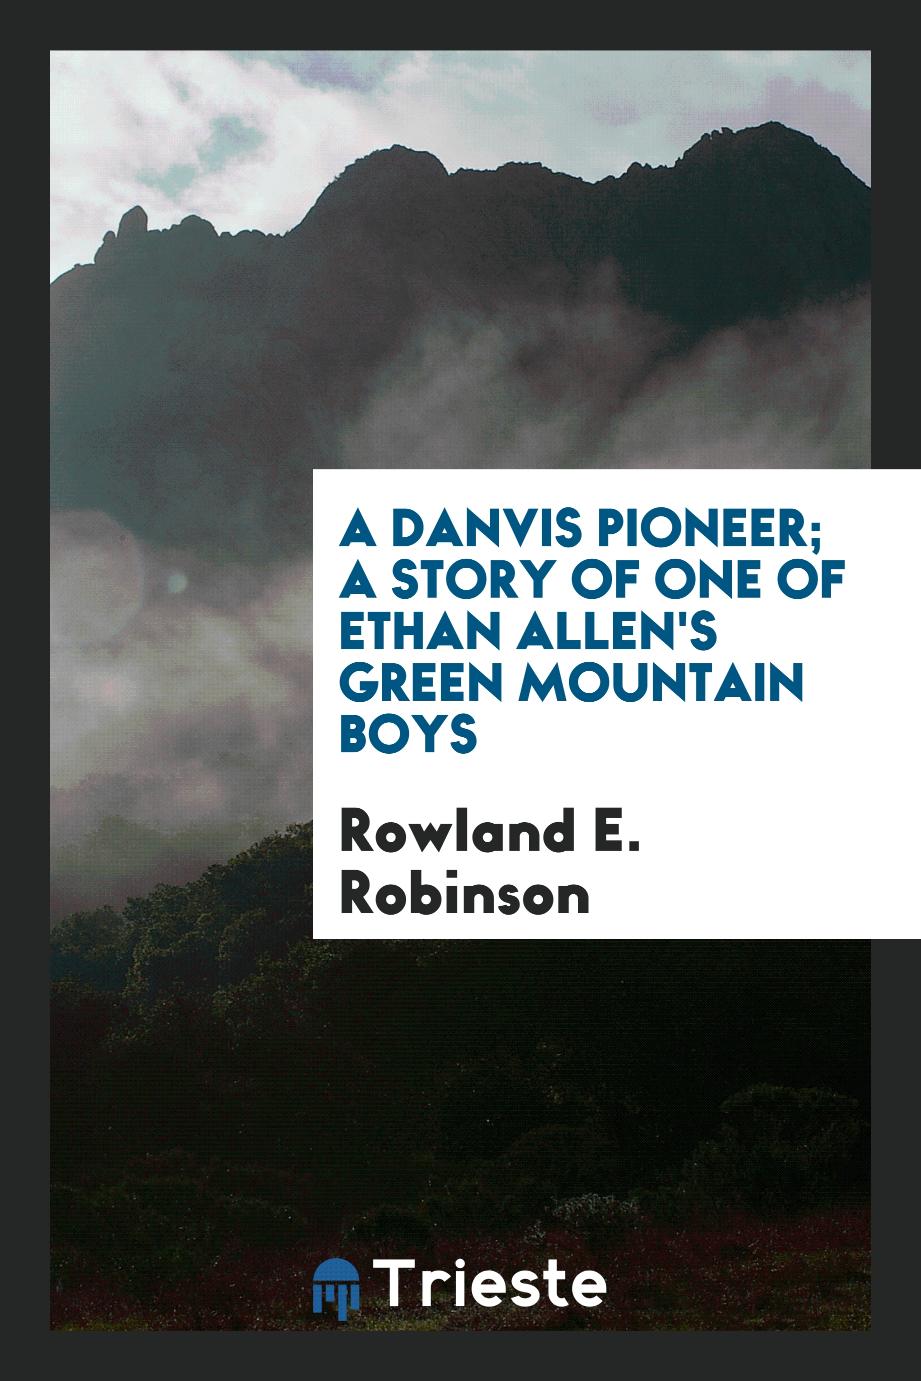 A Danvis pioneer; a story of one of Ethan Allen's Green mountain boys